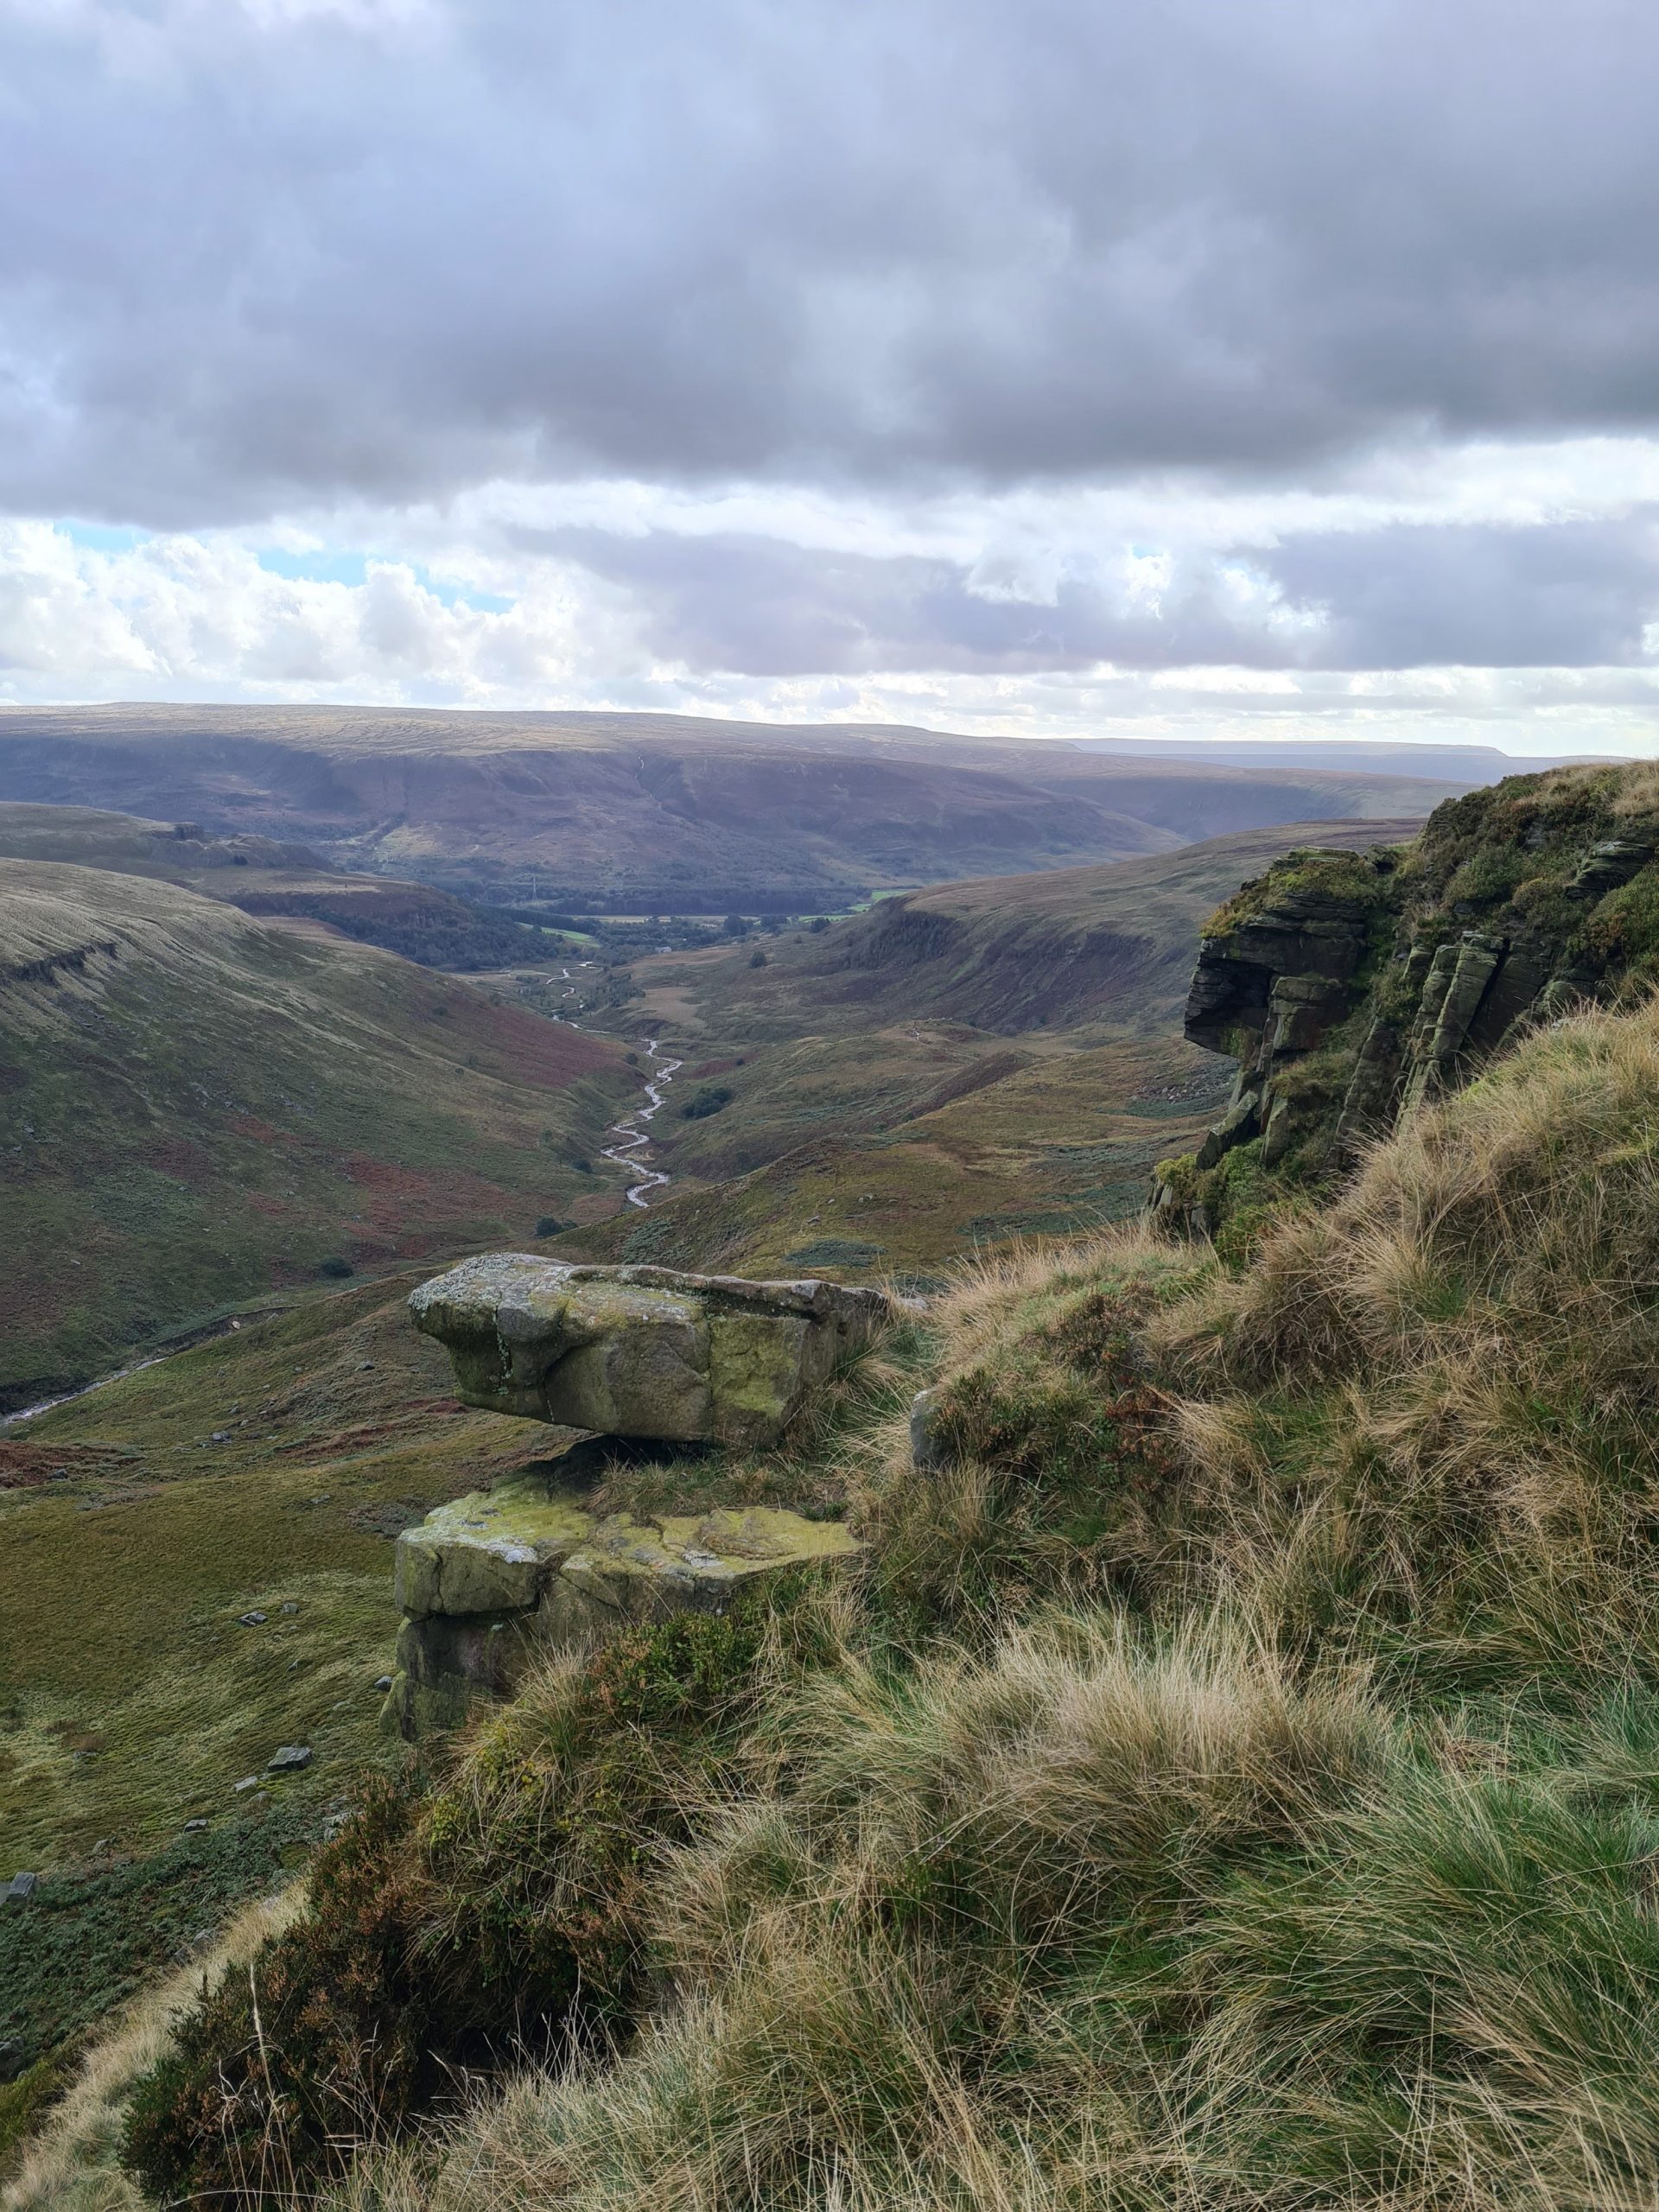 Black Chew Head and Laddow Rocks Circular from Crowden Camp Site - Solo Hike from The Wandering Wildflower